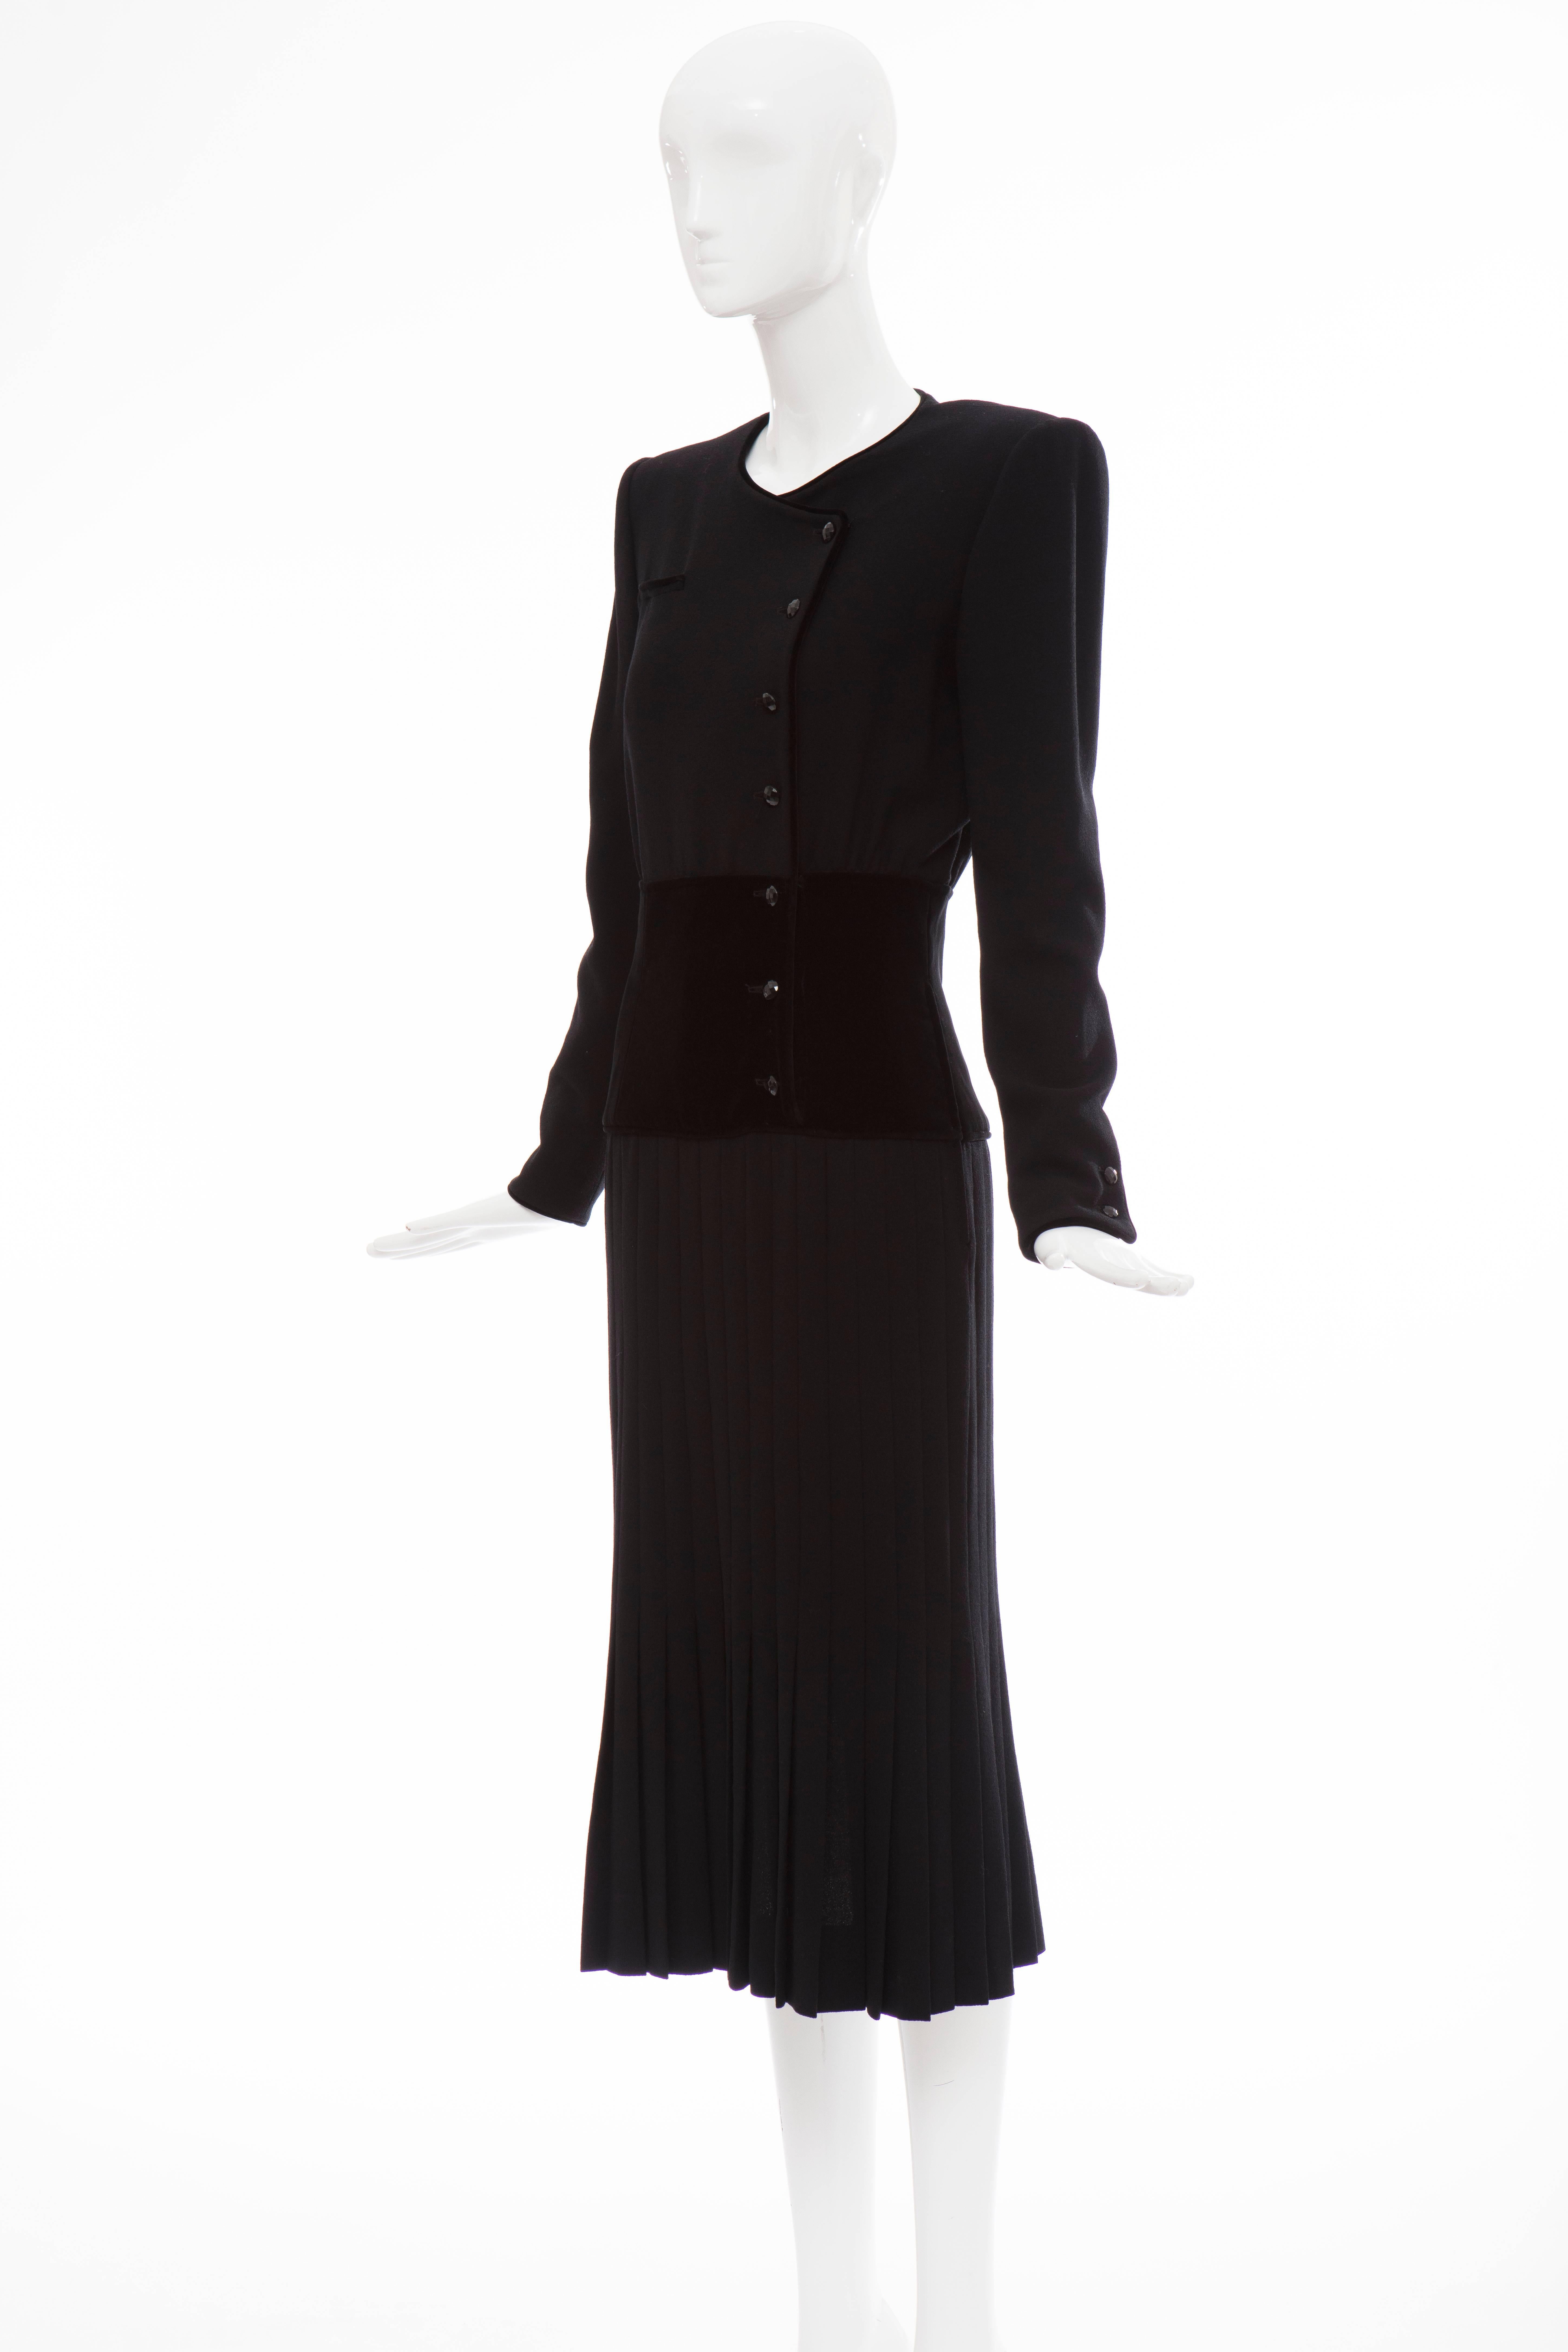 Valentino Black Wool Crepe And Velvet Evening Dress, Circa 1980's For Sale 4